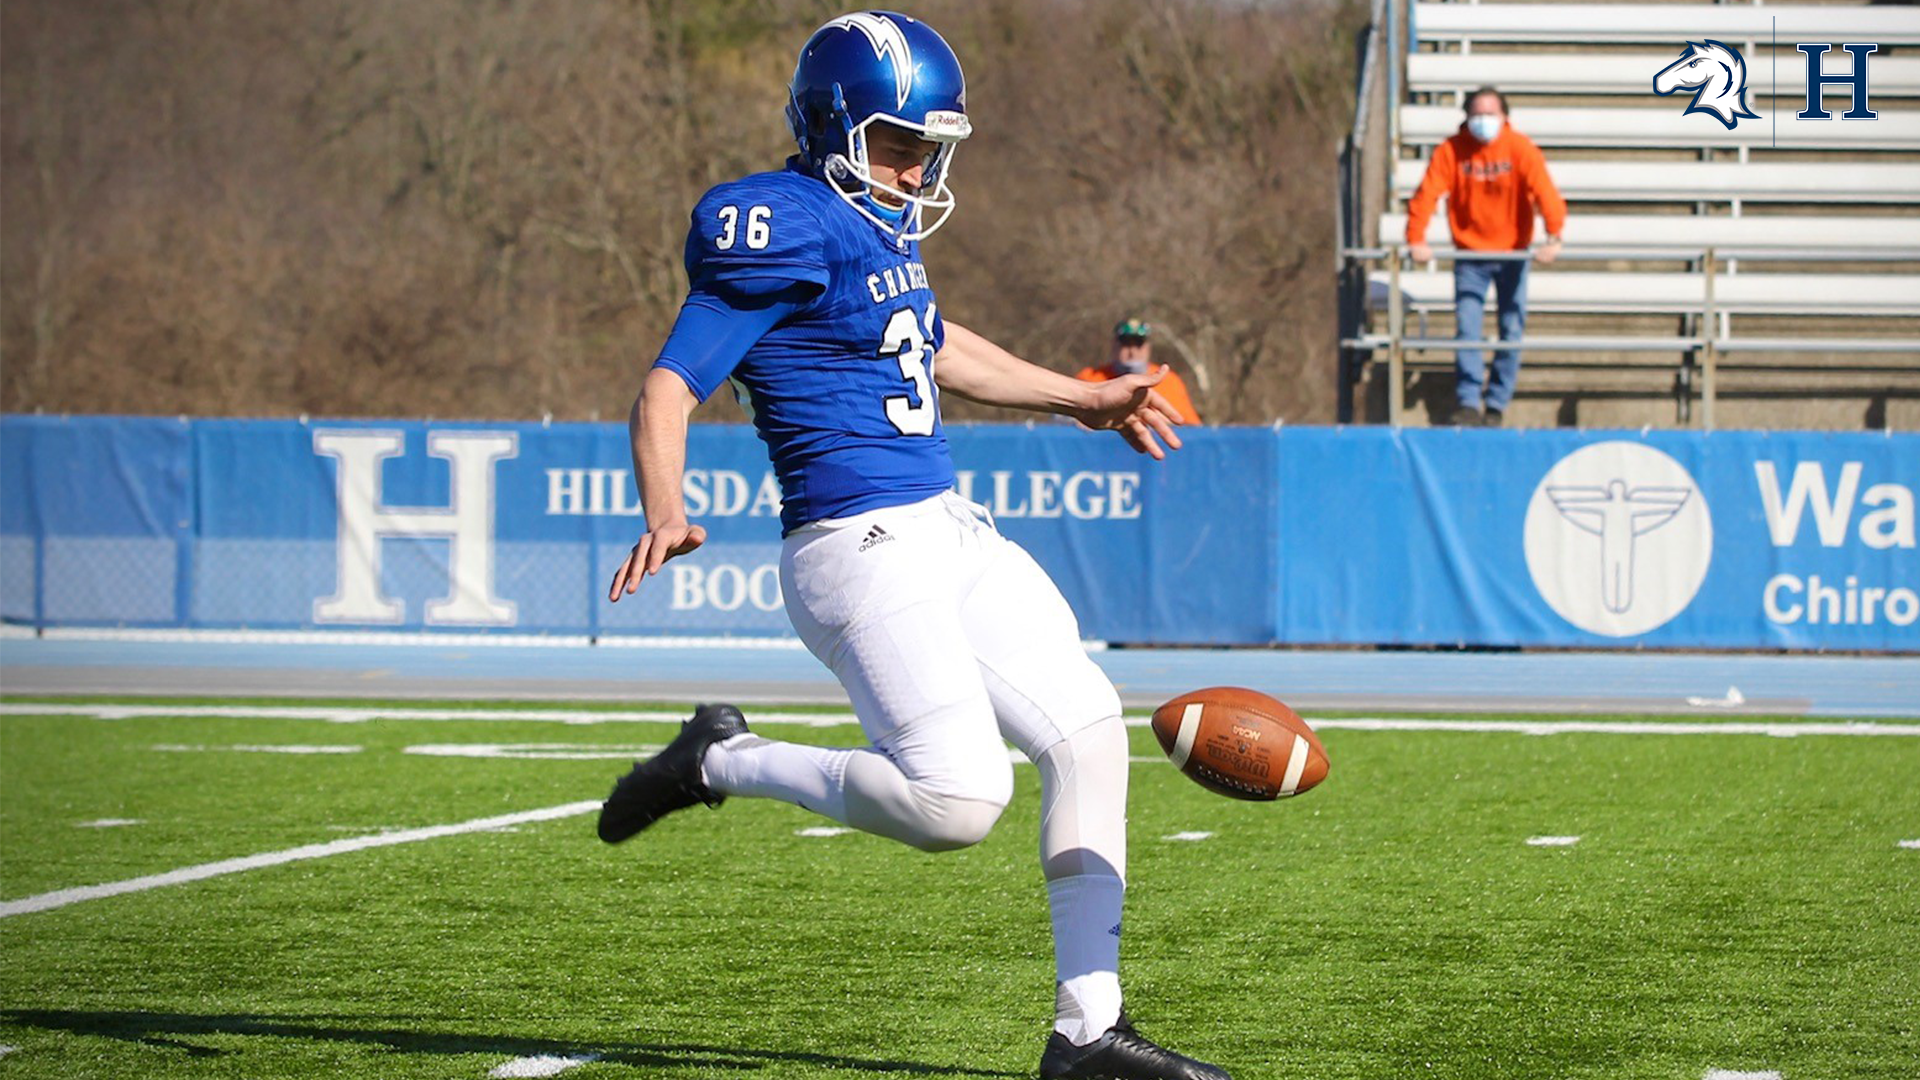 Hillsdale punter Jack Shannon named G-MAC Football Special Teams Player of the Week (March 29-April 5)